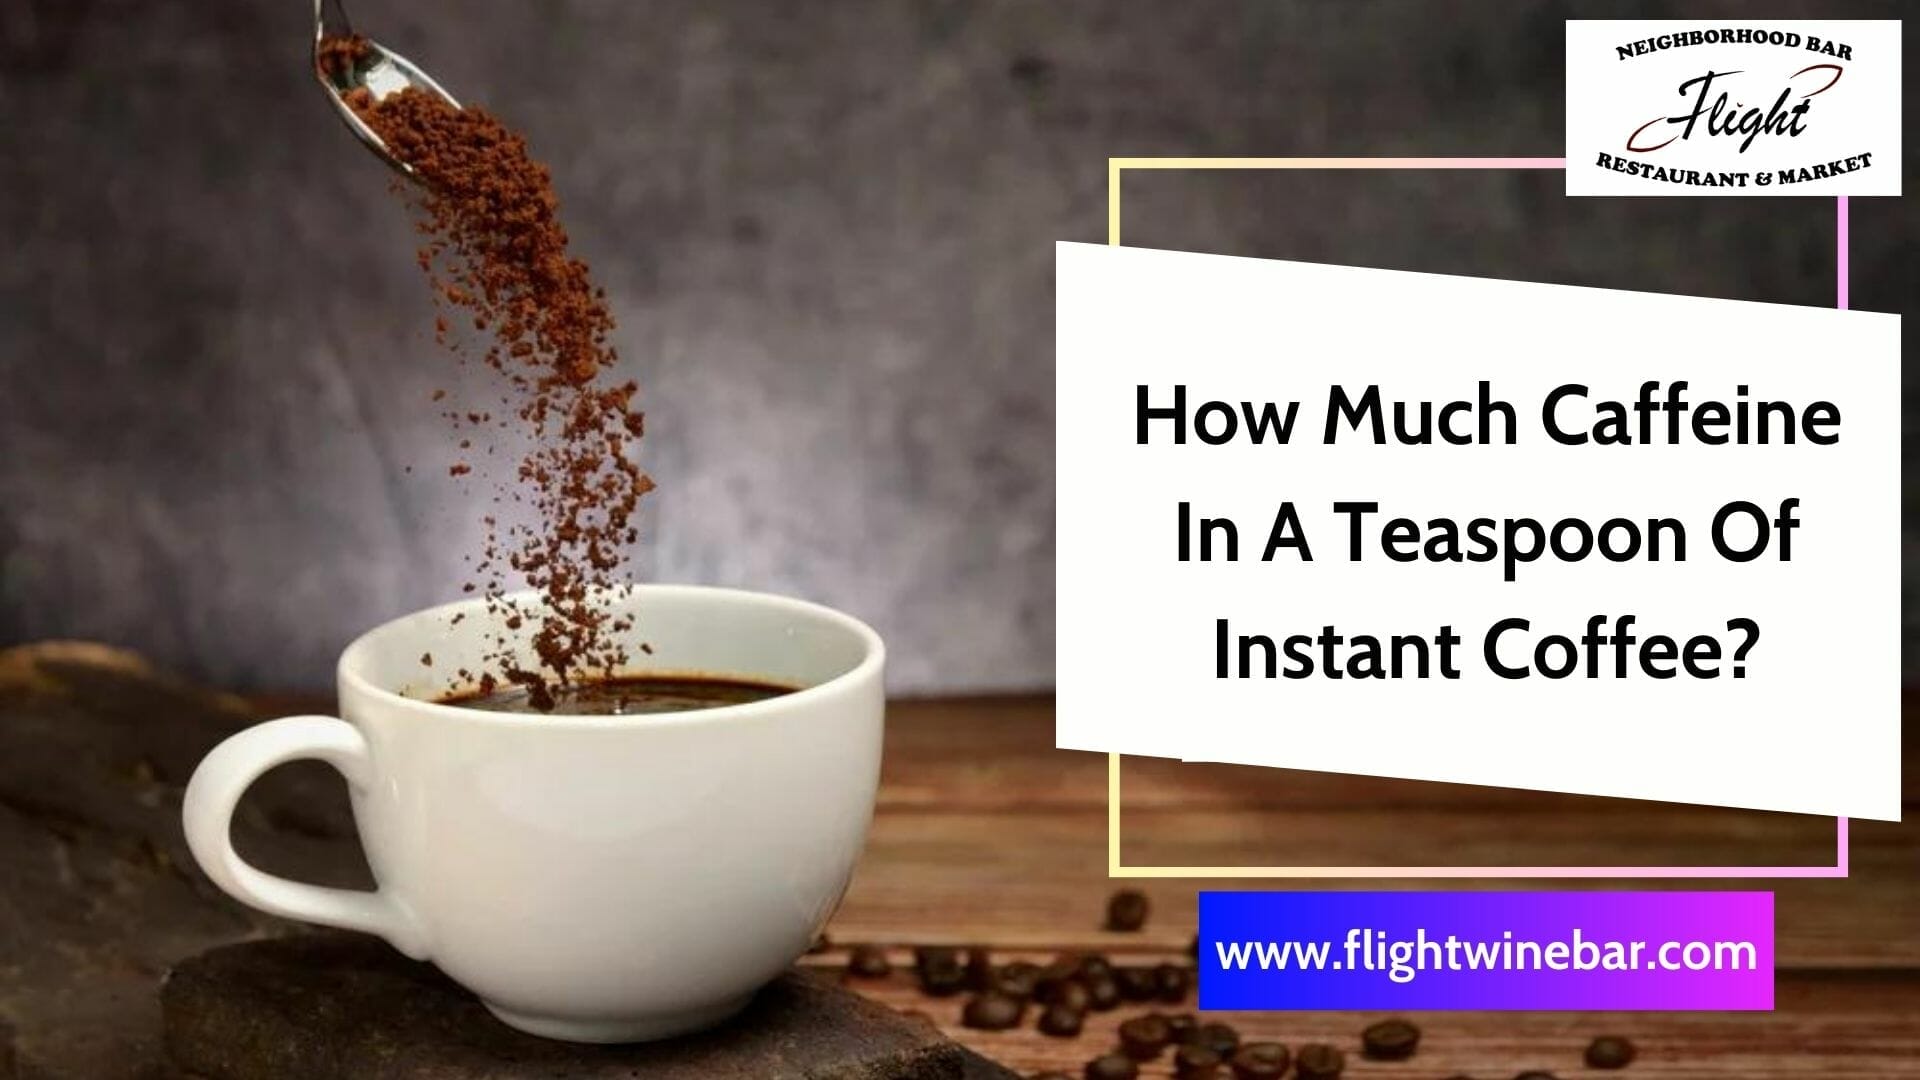 How Much Caffeine In A Teaspoon Of Instant Coffee